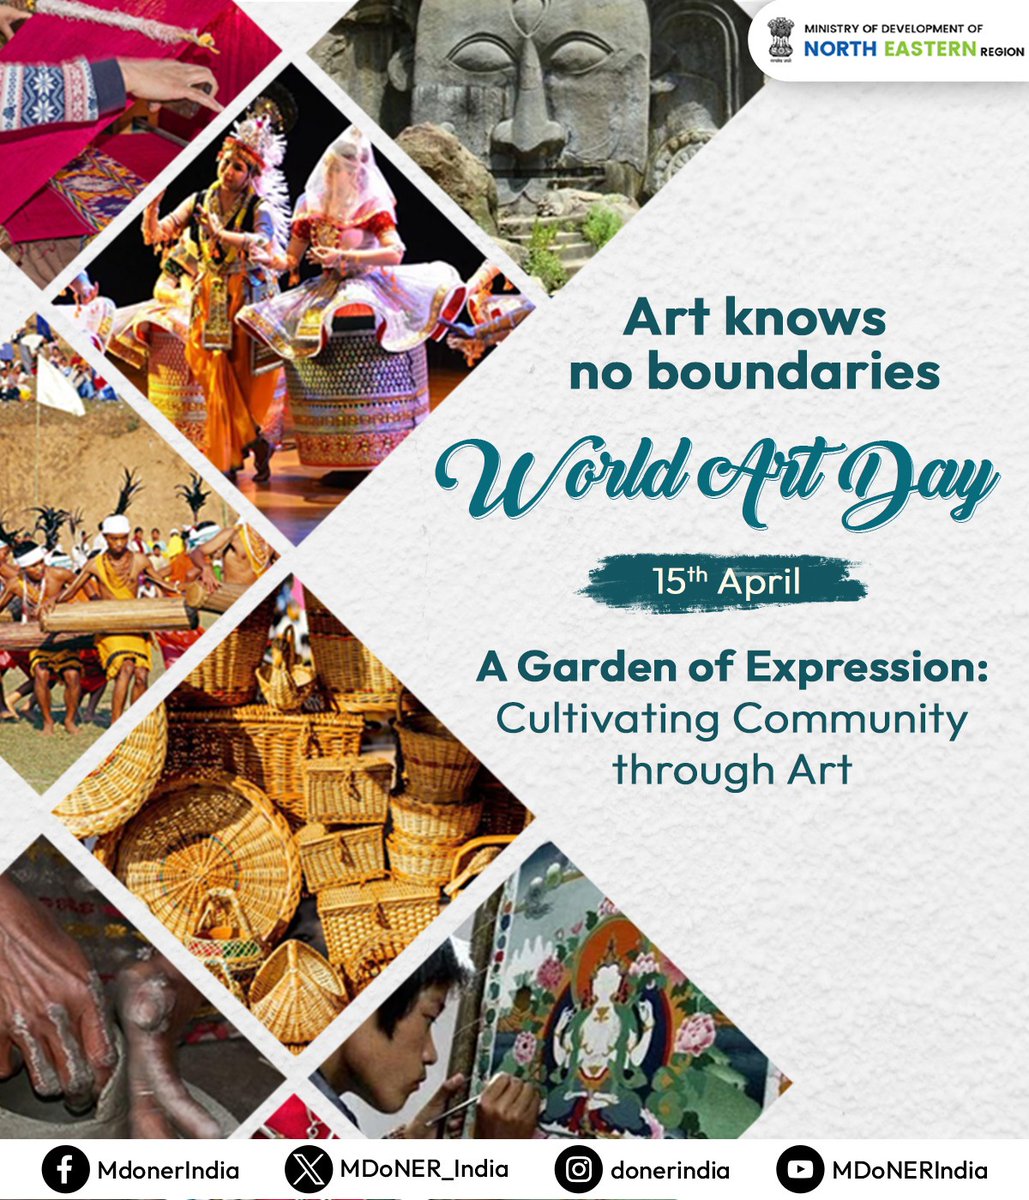 Celebrating World Art Day! Let's honor the visionaries who transform our world with vibrant creativity. Each masterpiece inspires us to see beauty and meaning everywhere. Keep cultivating community through art! #MagicOfArt #WorldArtDay #AGardenOfExpression